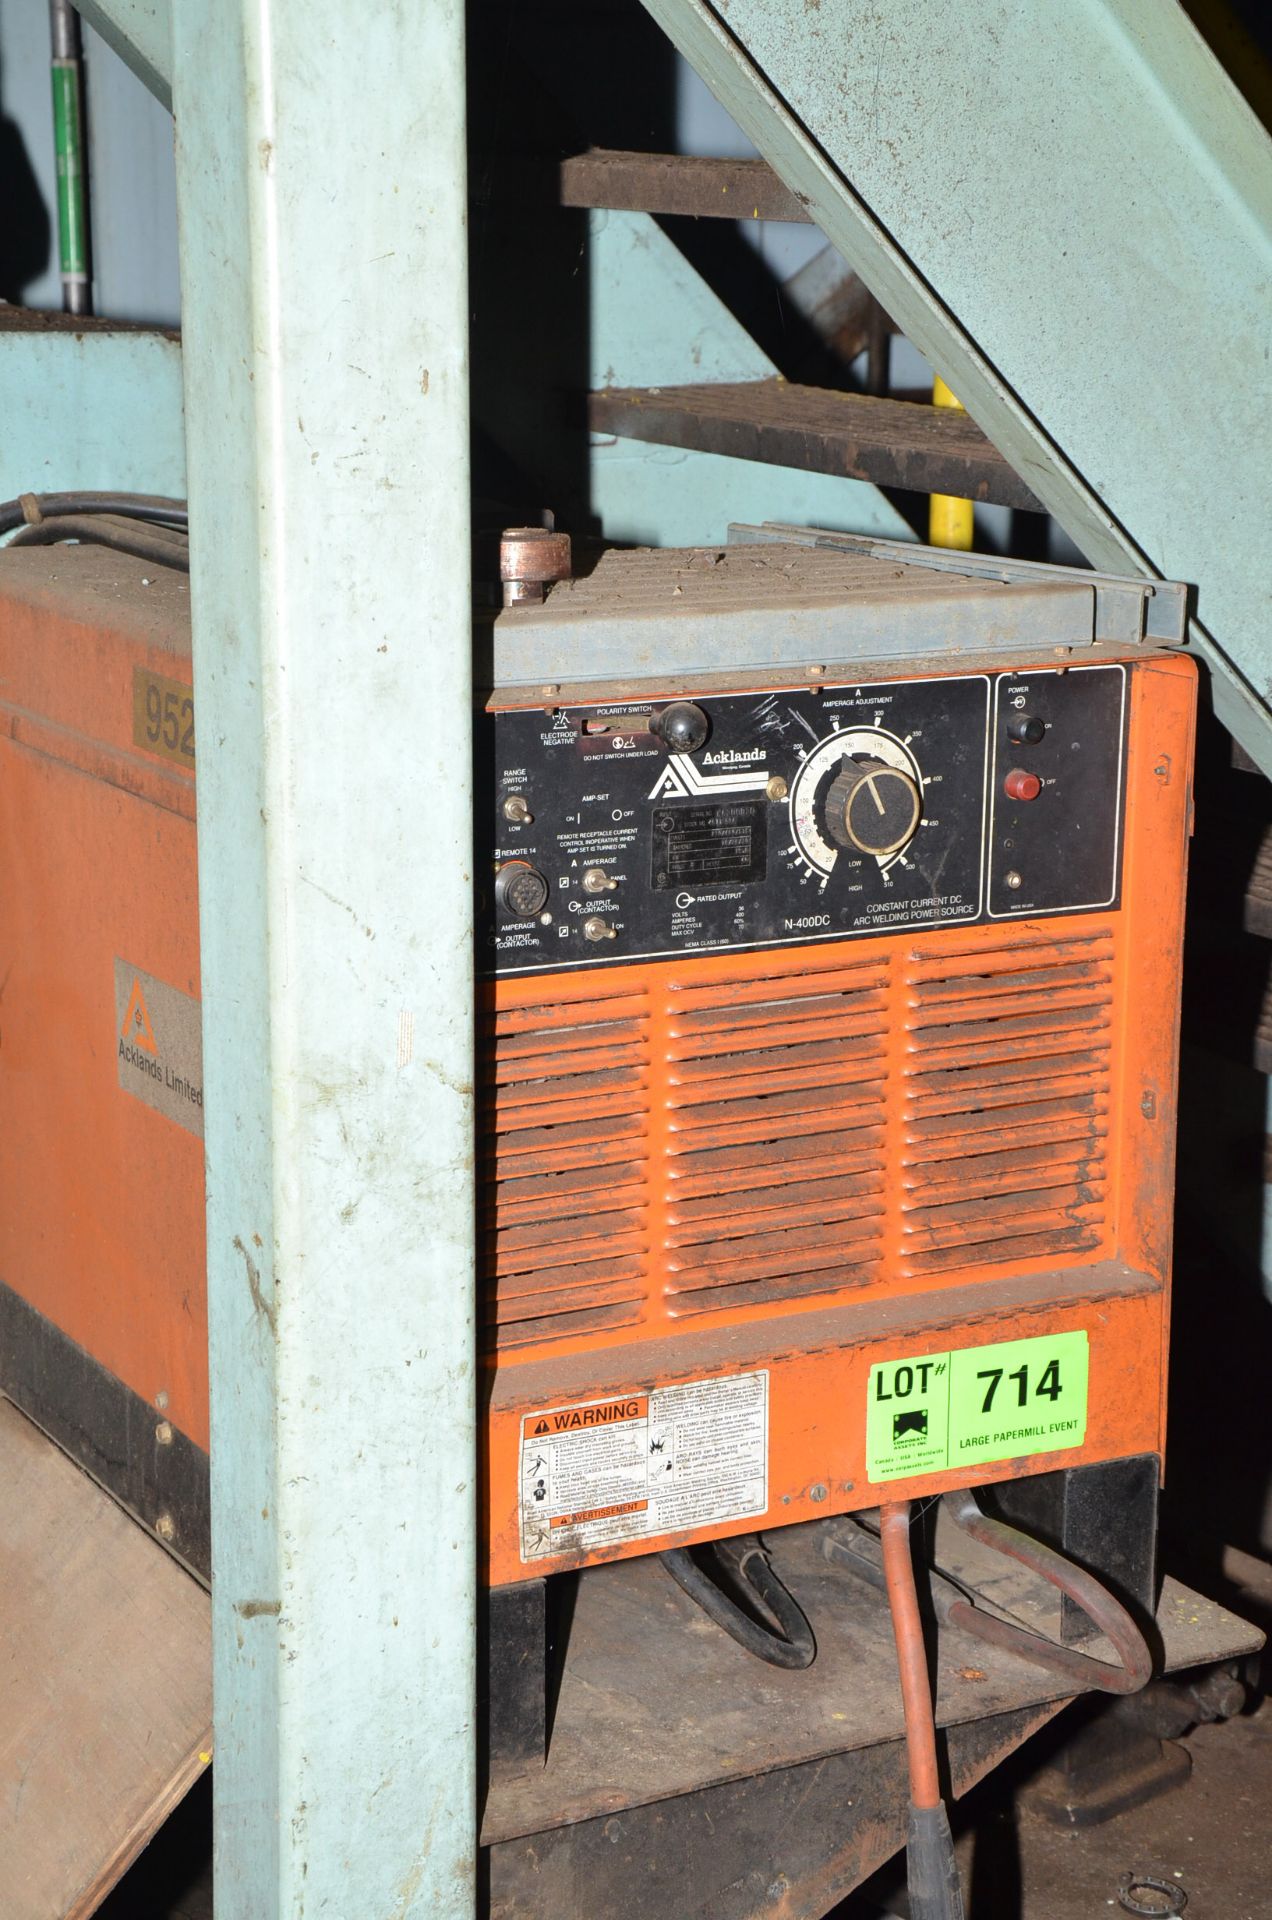 ACKLANDS N400-DC ARC WELDER WITH SOME CABLES AND GUN, S/N N/A [RIGGING FEES FOR LOT #714 - $85 USD